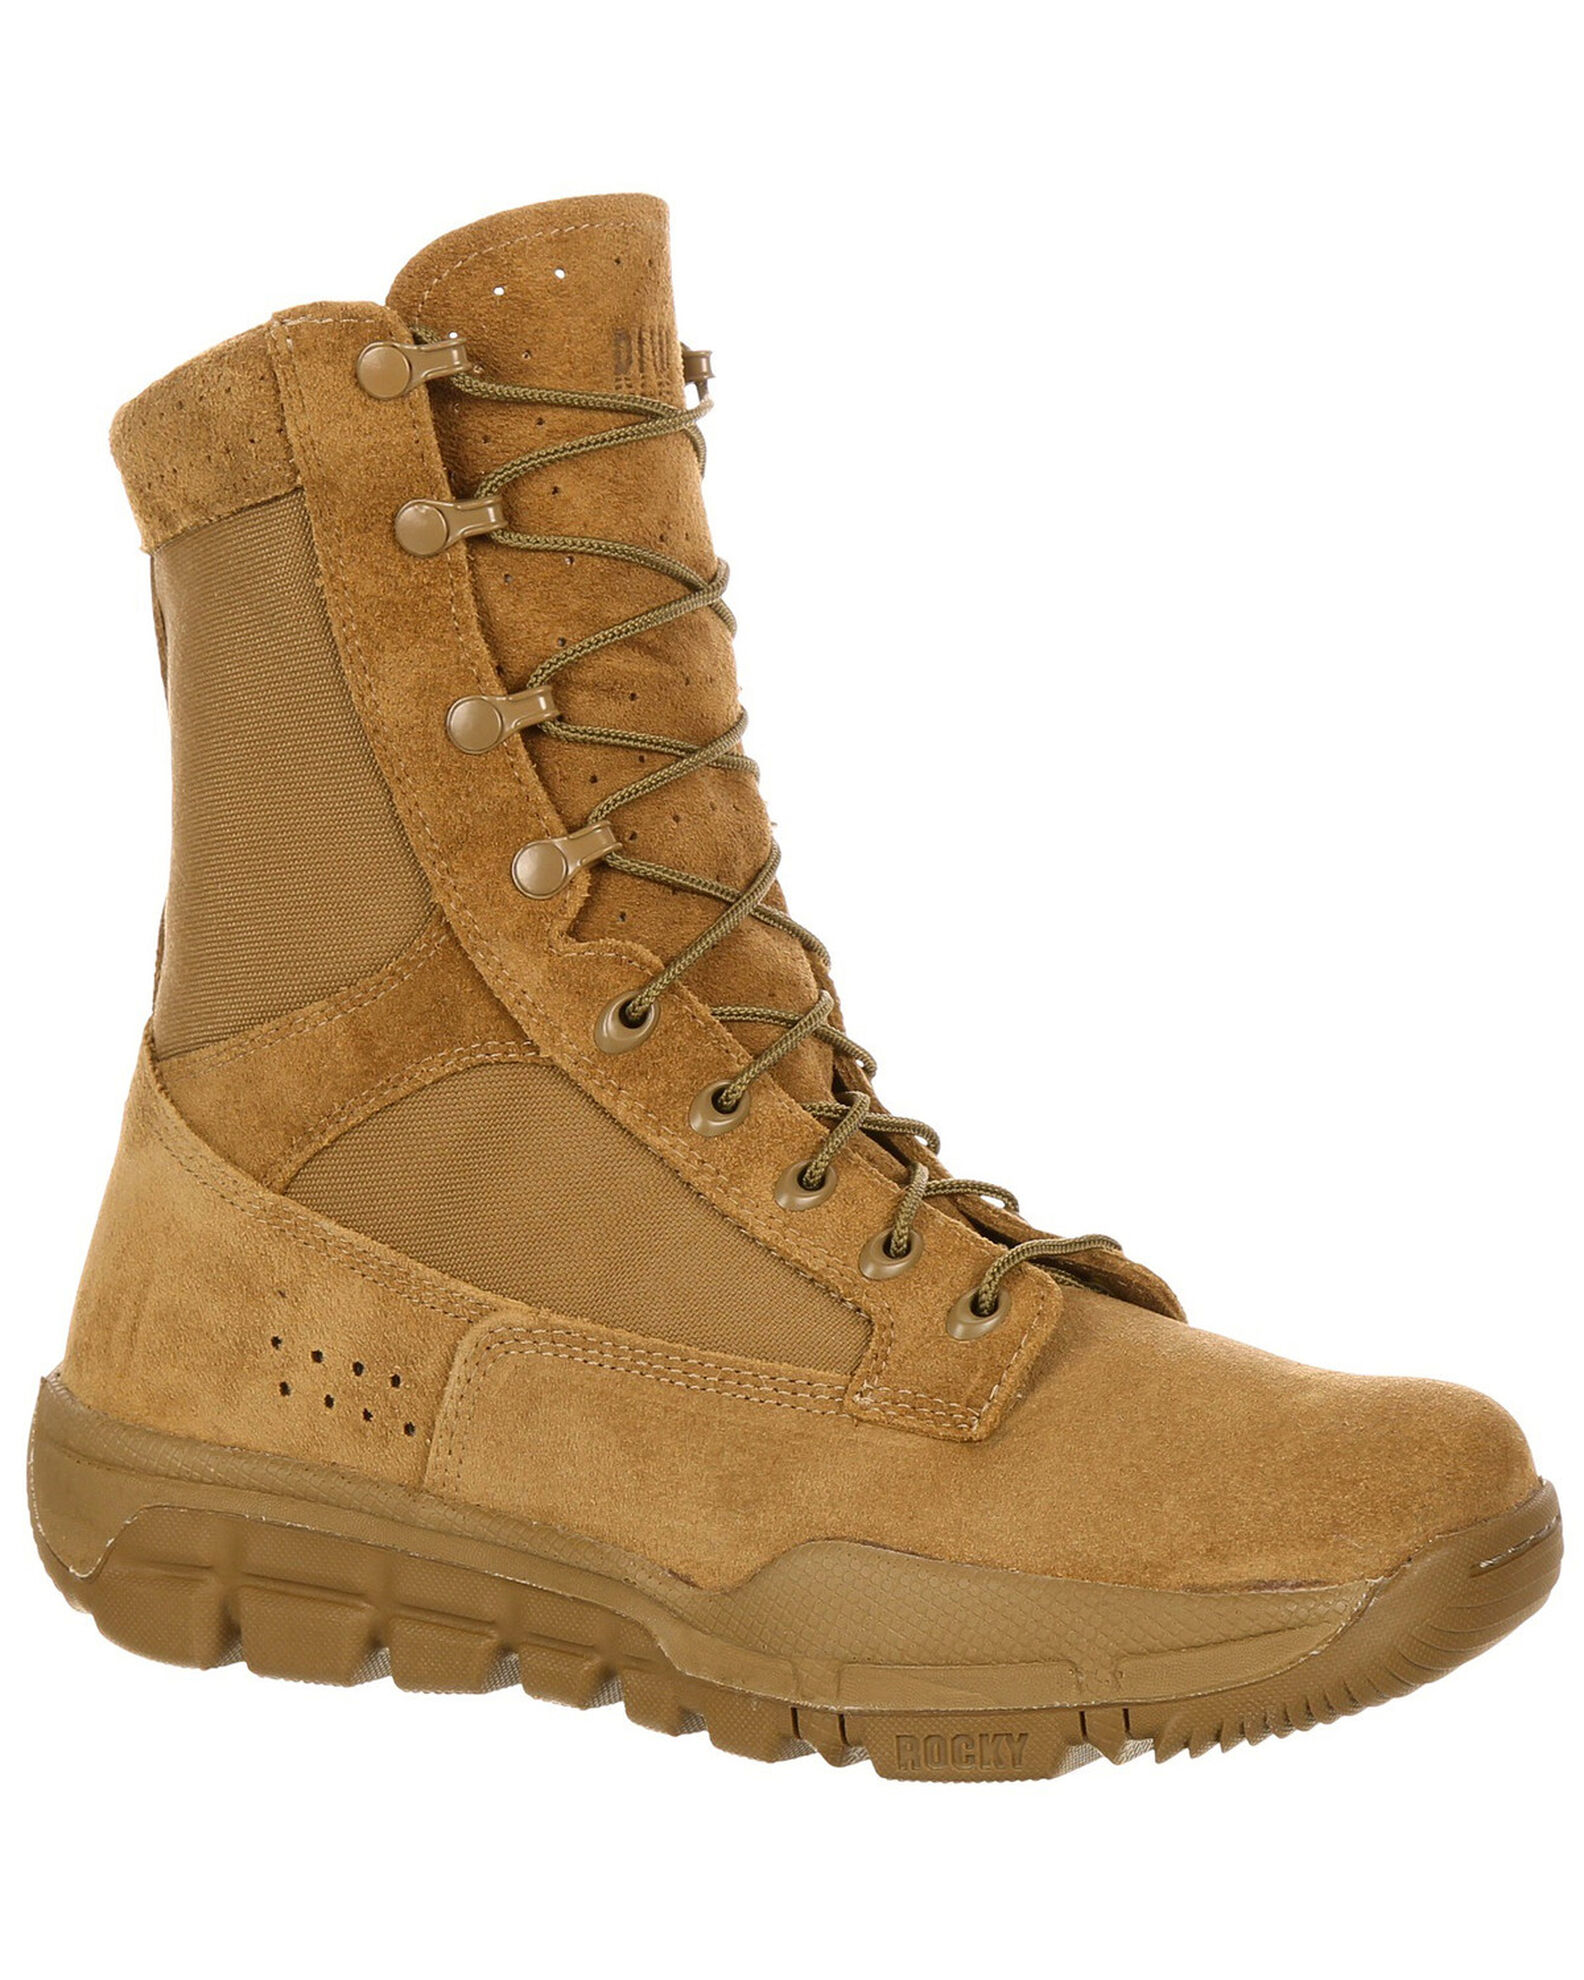 Rocky Men's Lightweight Commercial Military Boots | Boot Barn